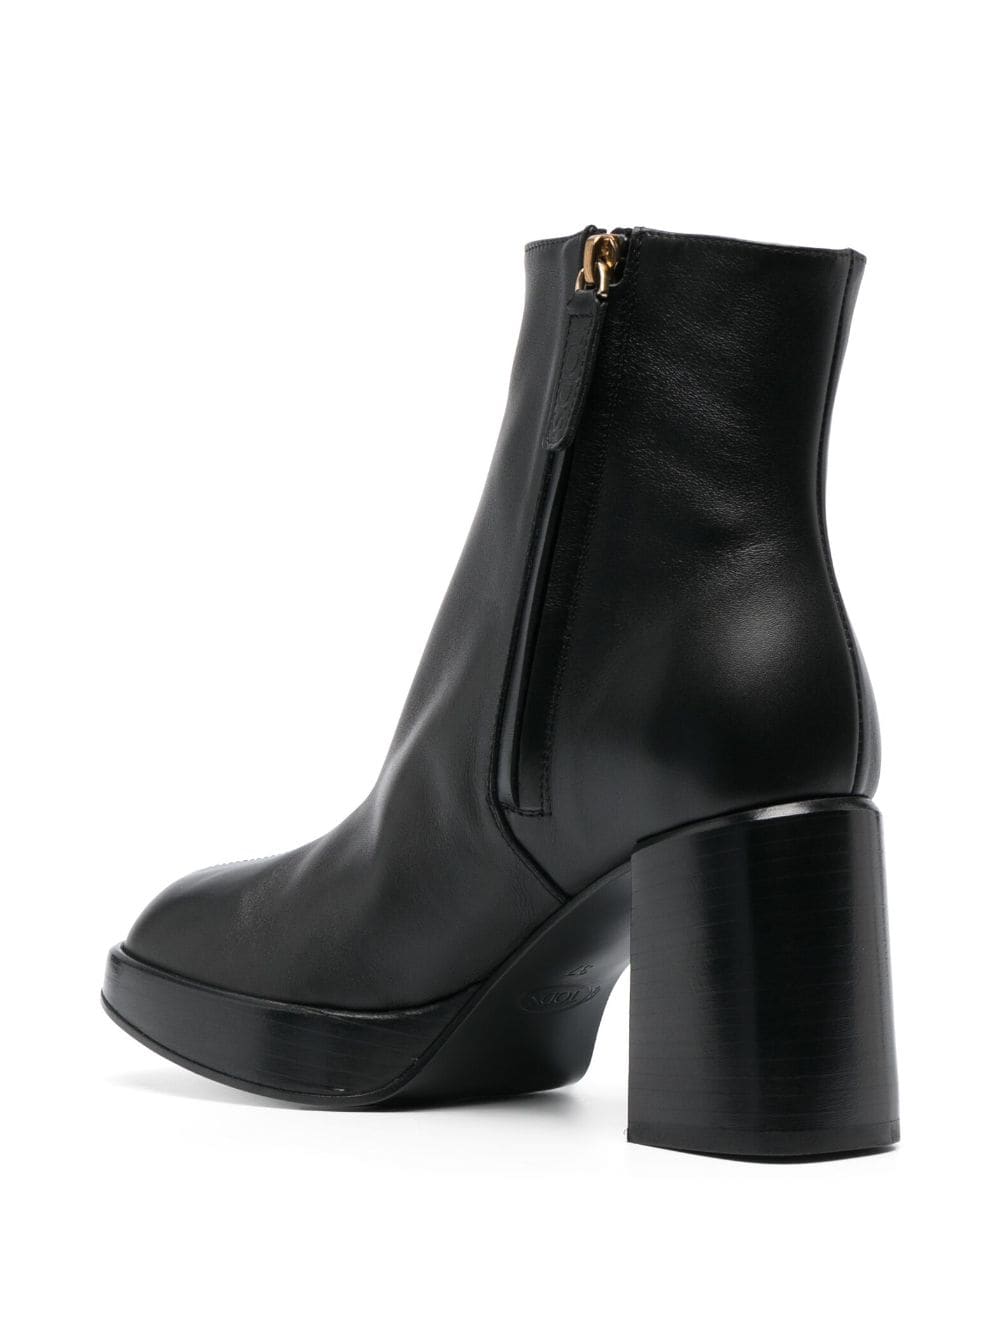 TOD'S Statement-Making Leather Square-Toe Boots for Women - FW23